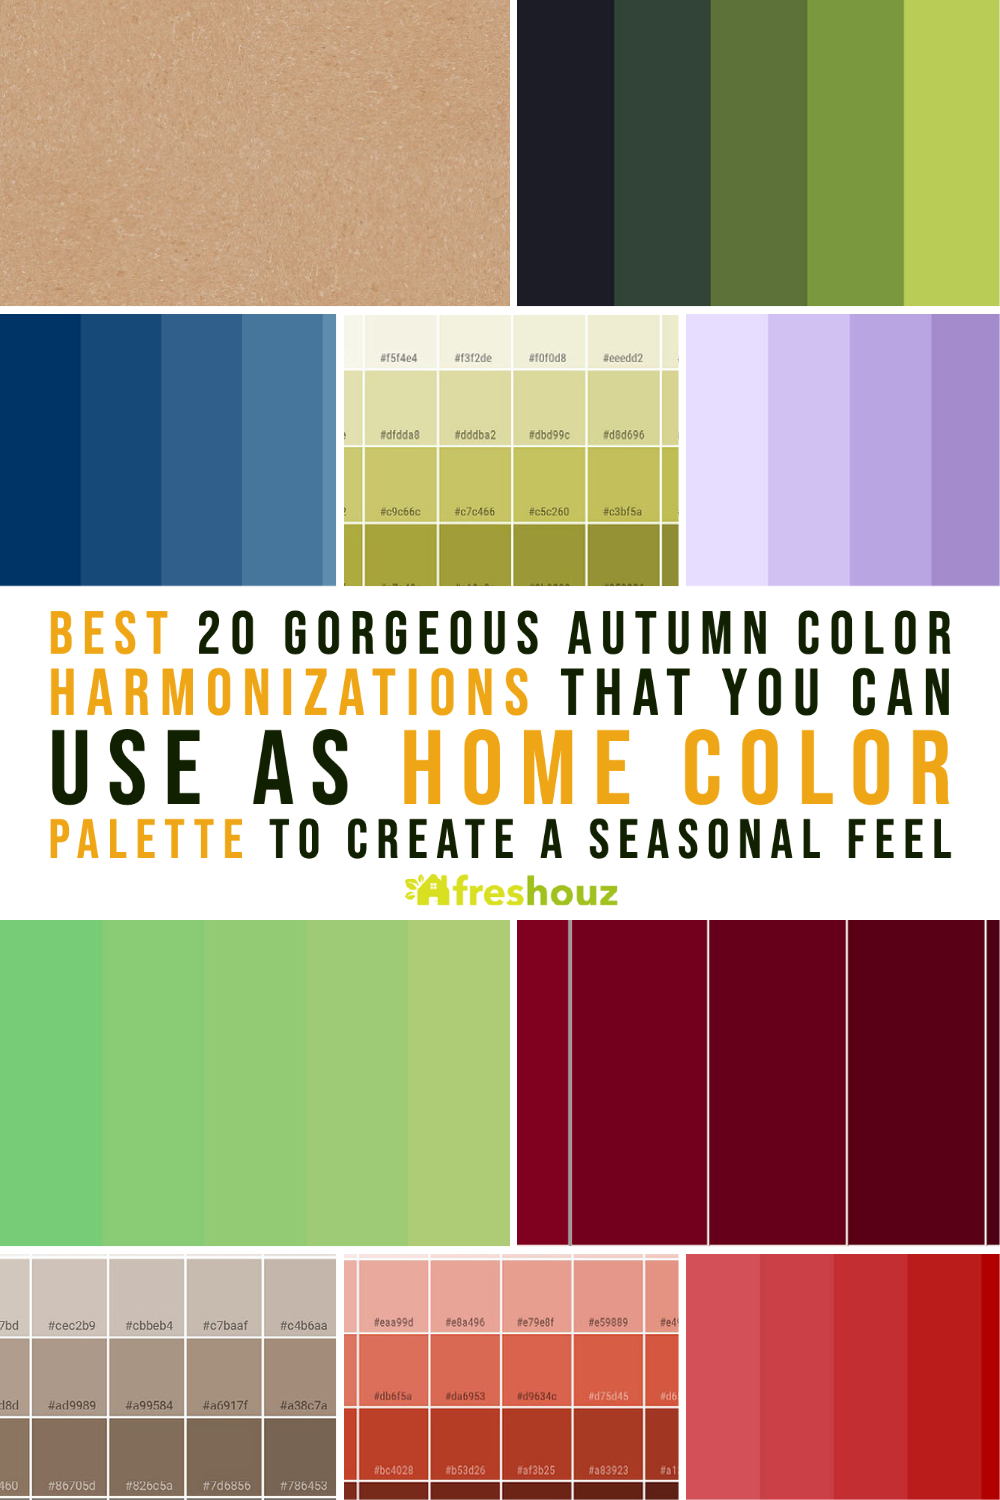 Best 20 Gorgeous Autumn Color Harmonizations That You Can Use As Home Color Palette To Create A Seasonal Feel